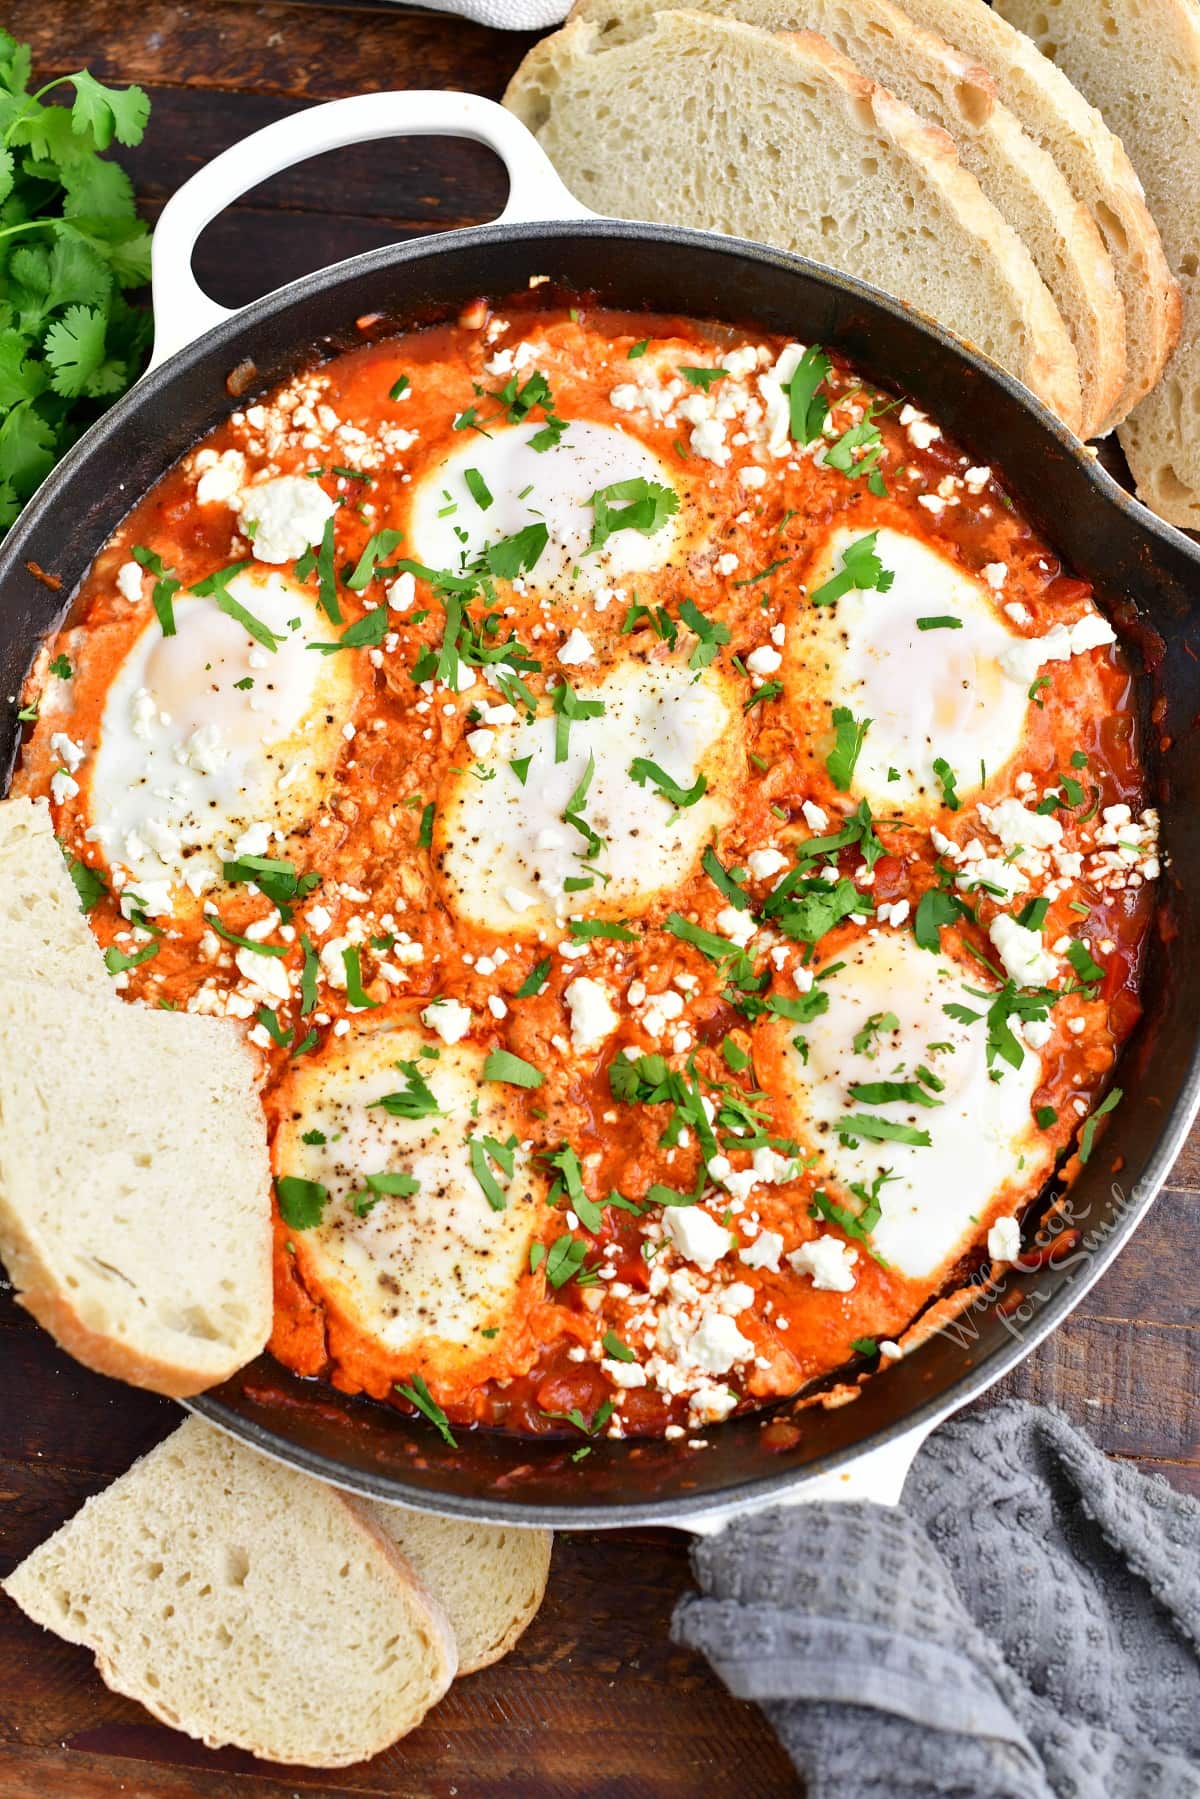 A few slices of bread are placed next to a black skillet filled with shakshuka.